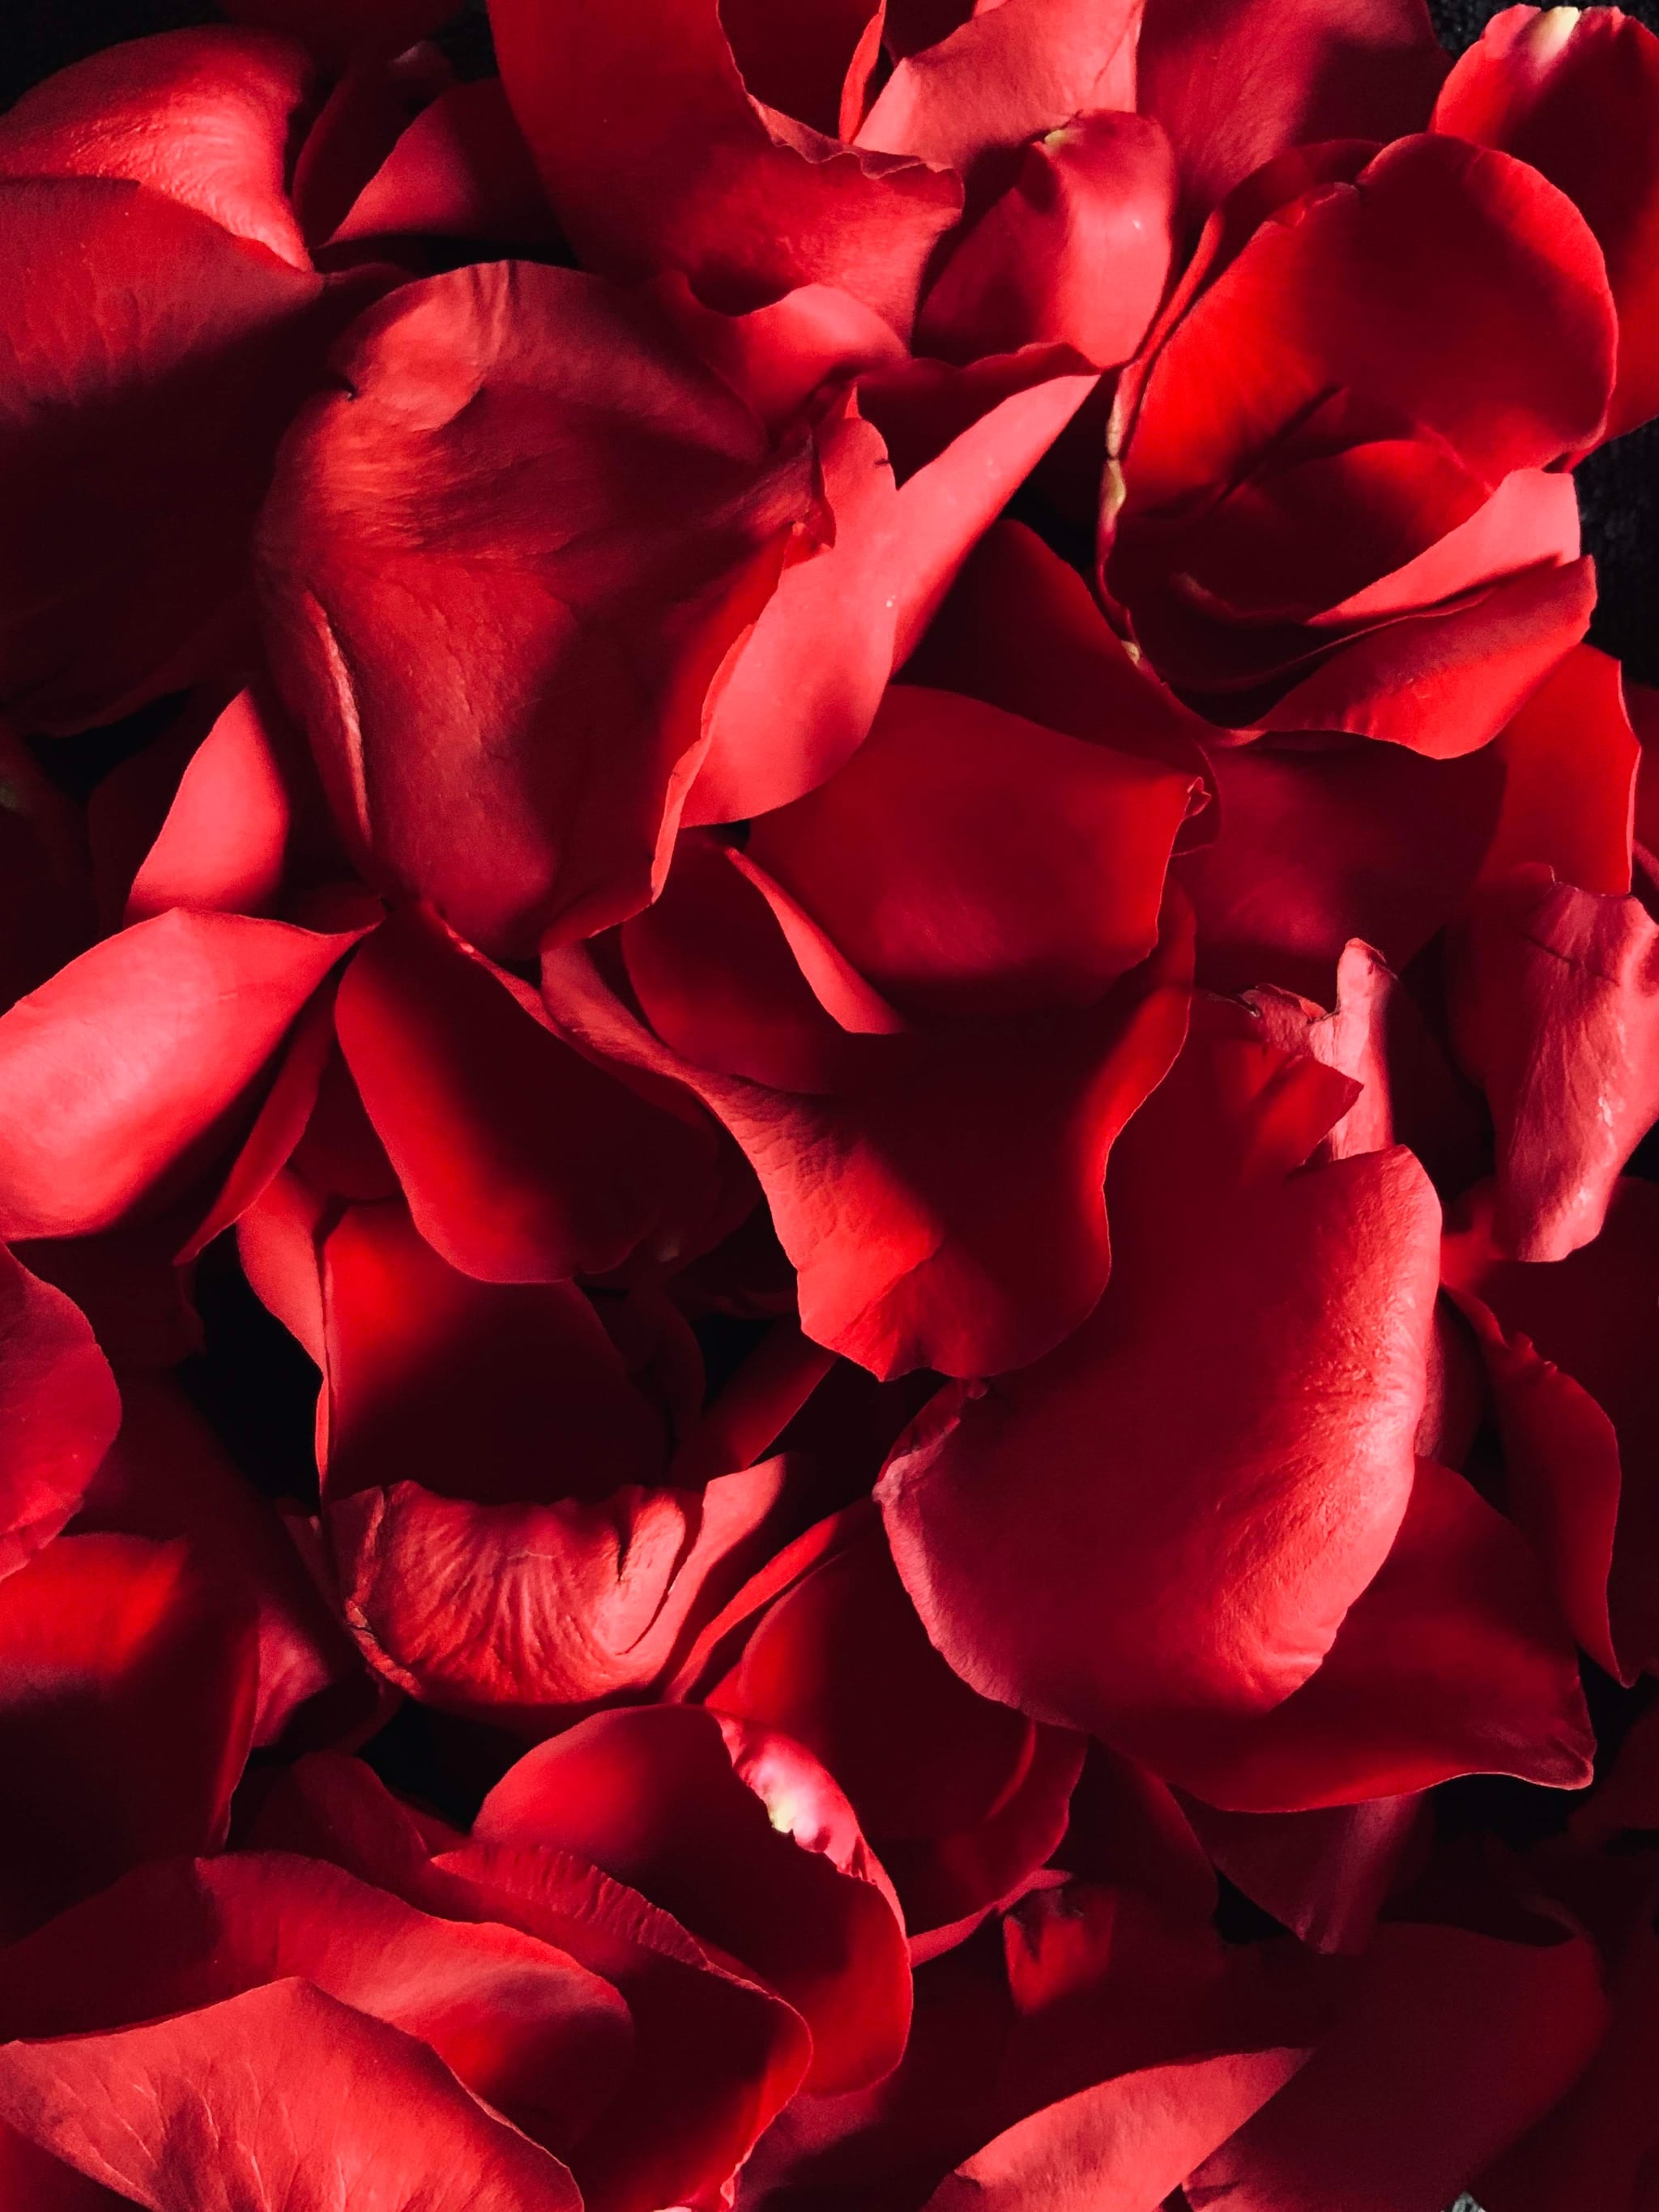 Red Rose Aesthetic Wallpapers on WallpaperDog